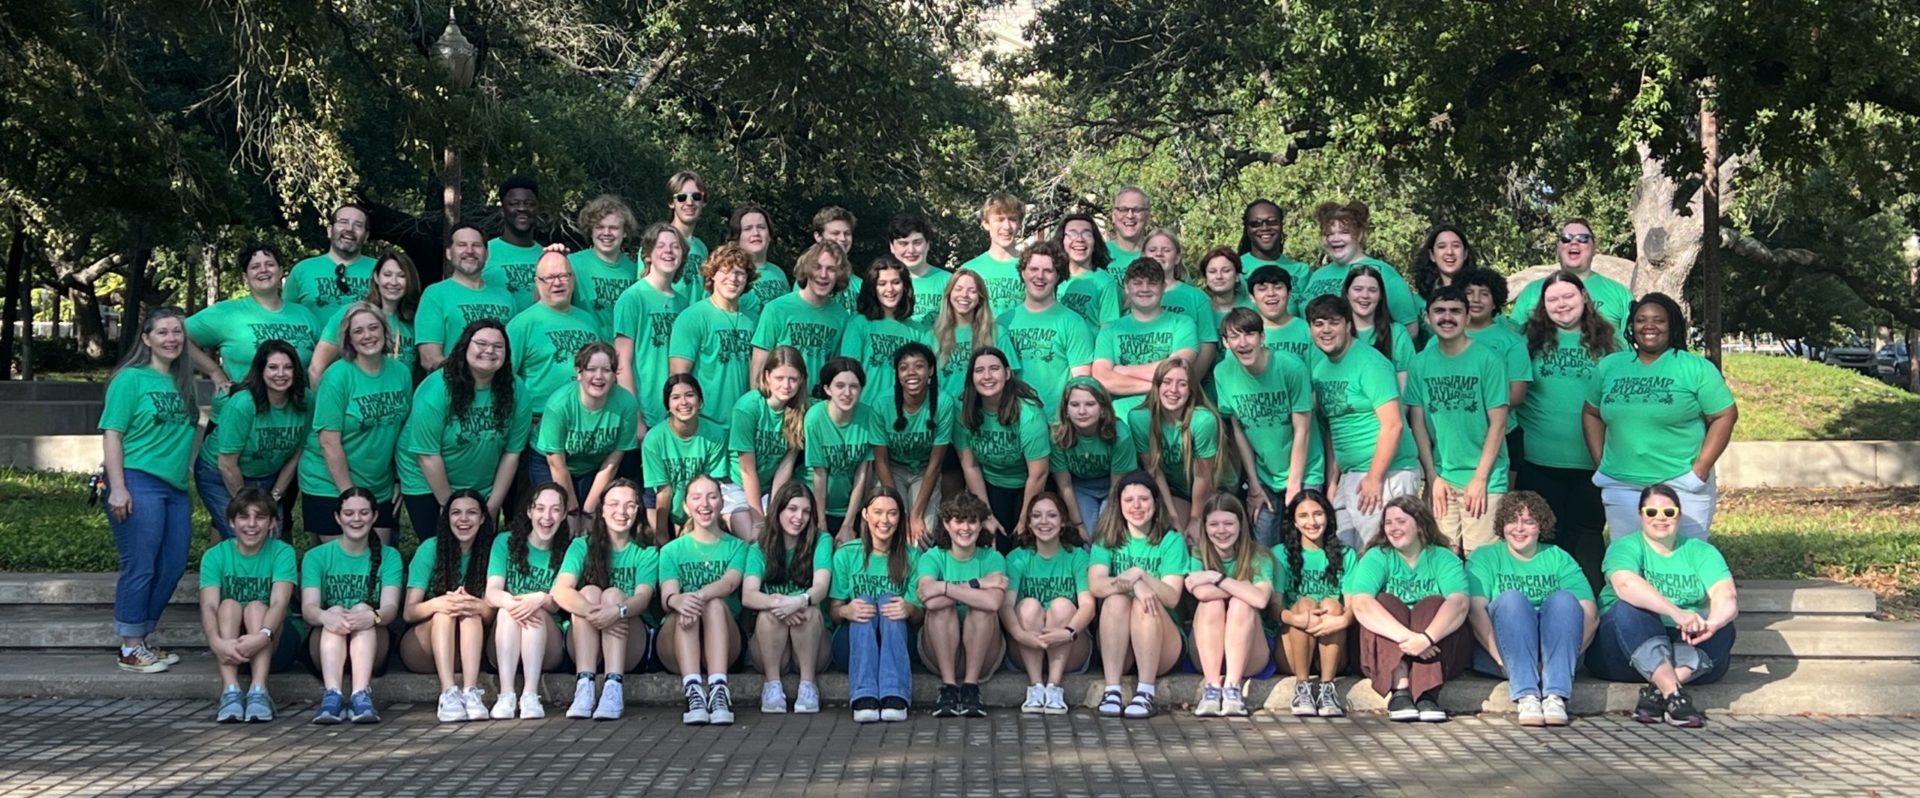 Tal Lostracco's Summer Theatre Camp at Baylor University -- July 7-20 